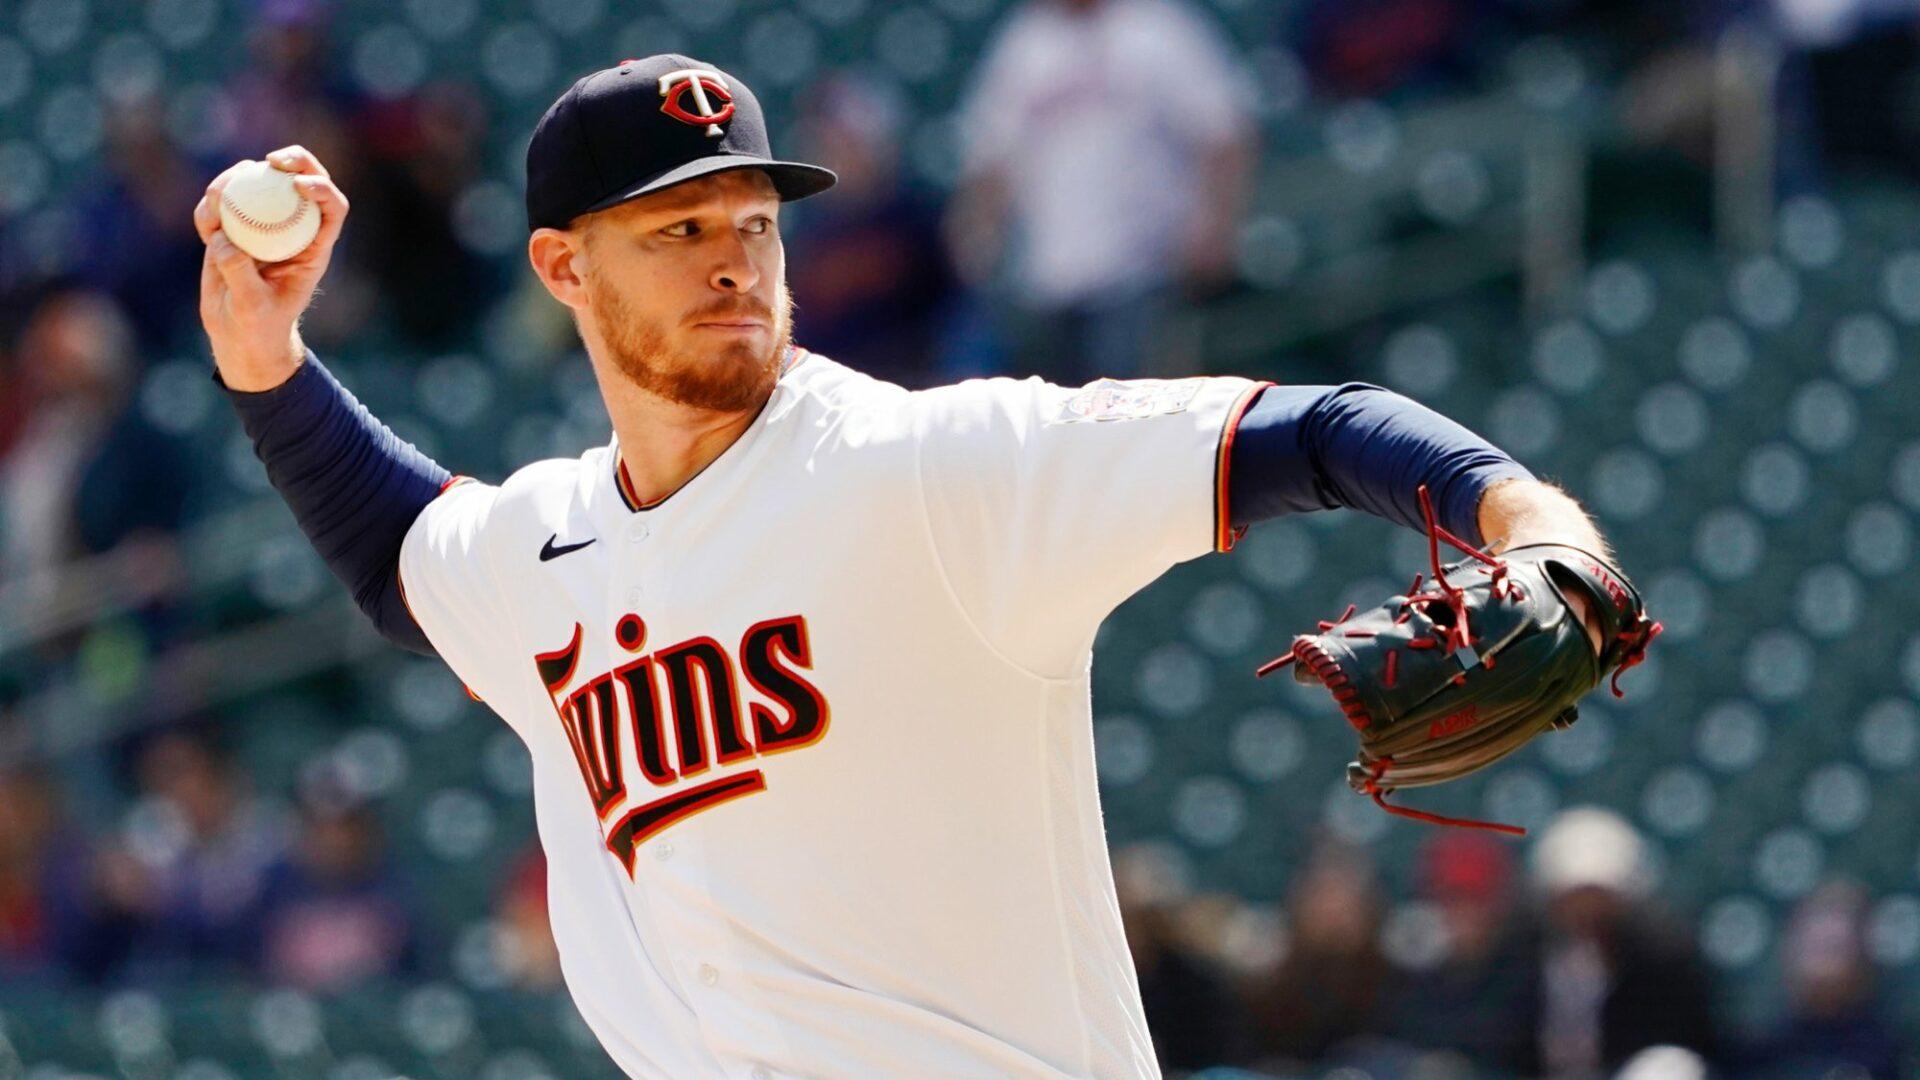 Twins vs Rays Prediction & Best Bet (June 8): Pitchers Shine at Tropicana Field